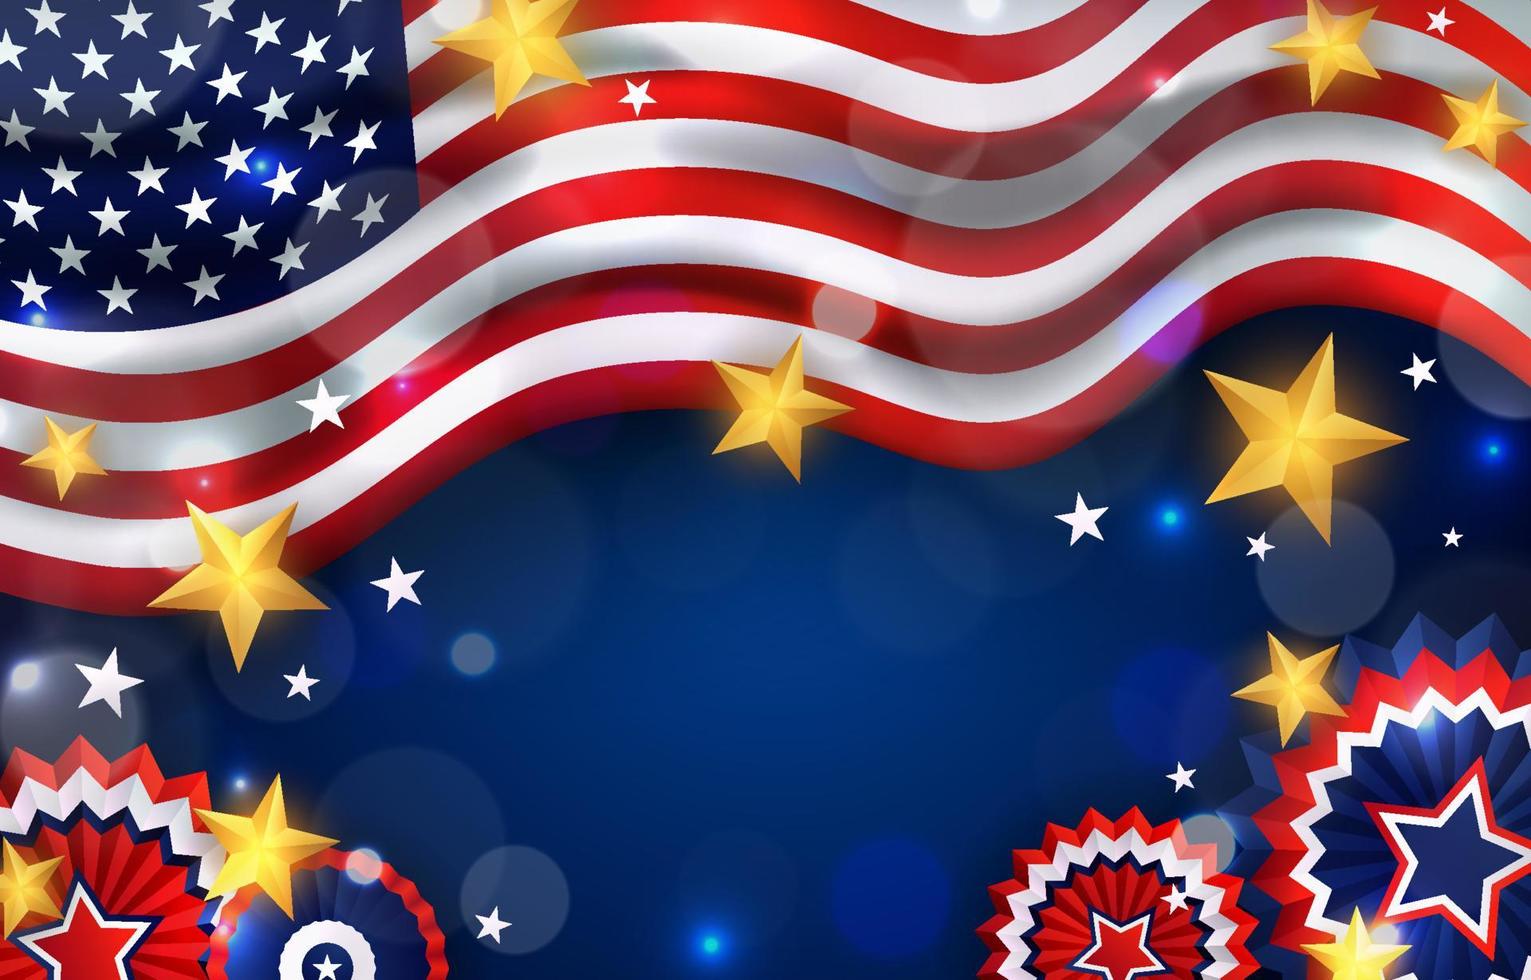 4th of July Patriotism Background vector